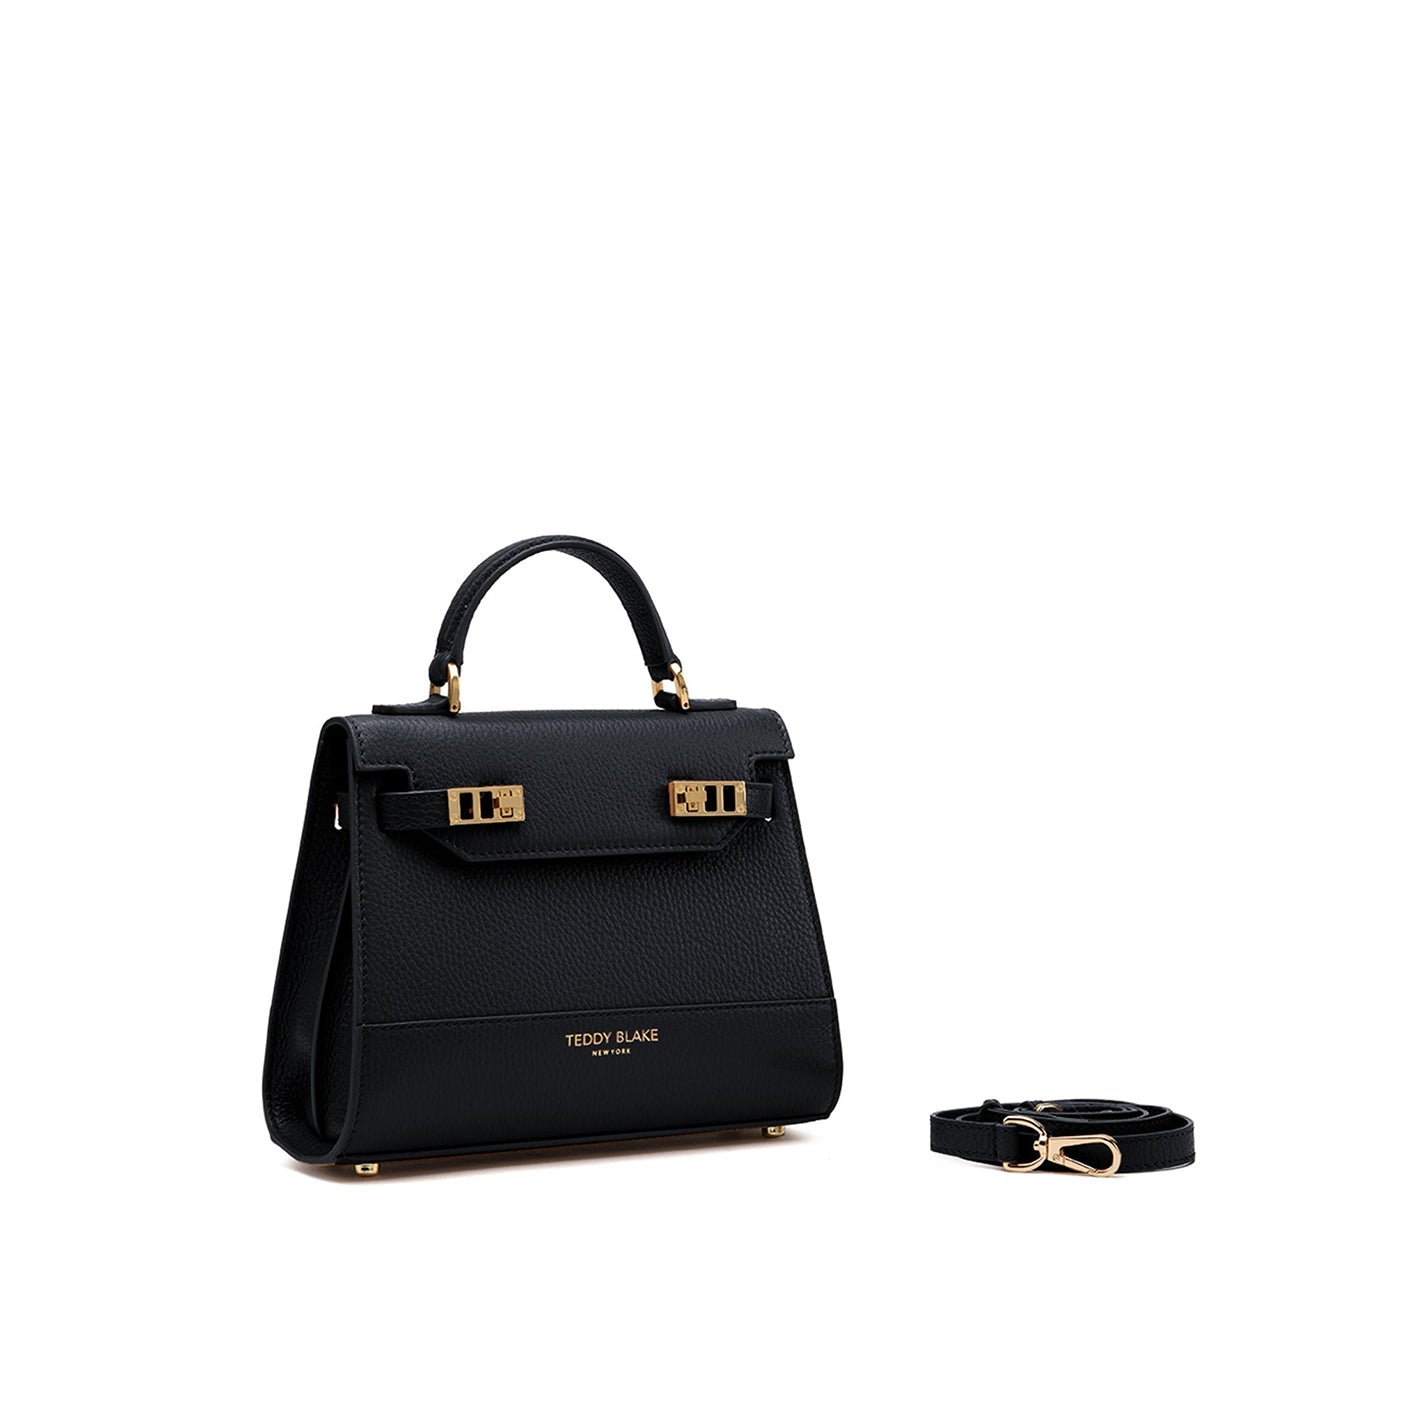 kim-stampatto-9-black-leather-bag-with-handle